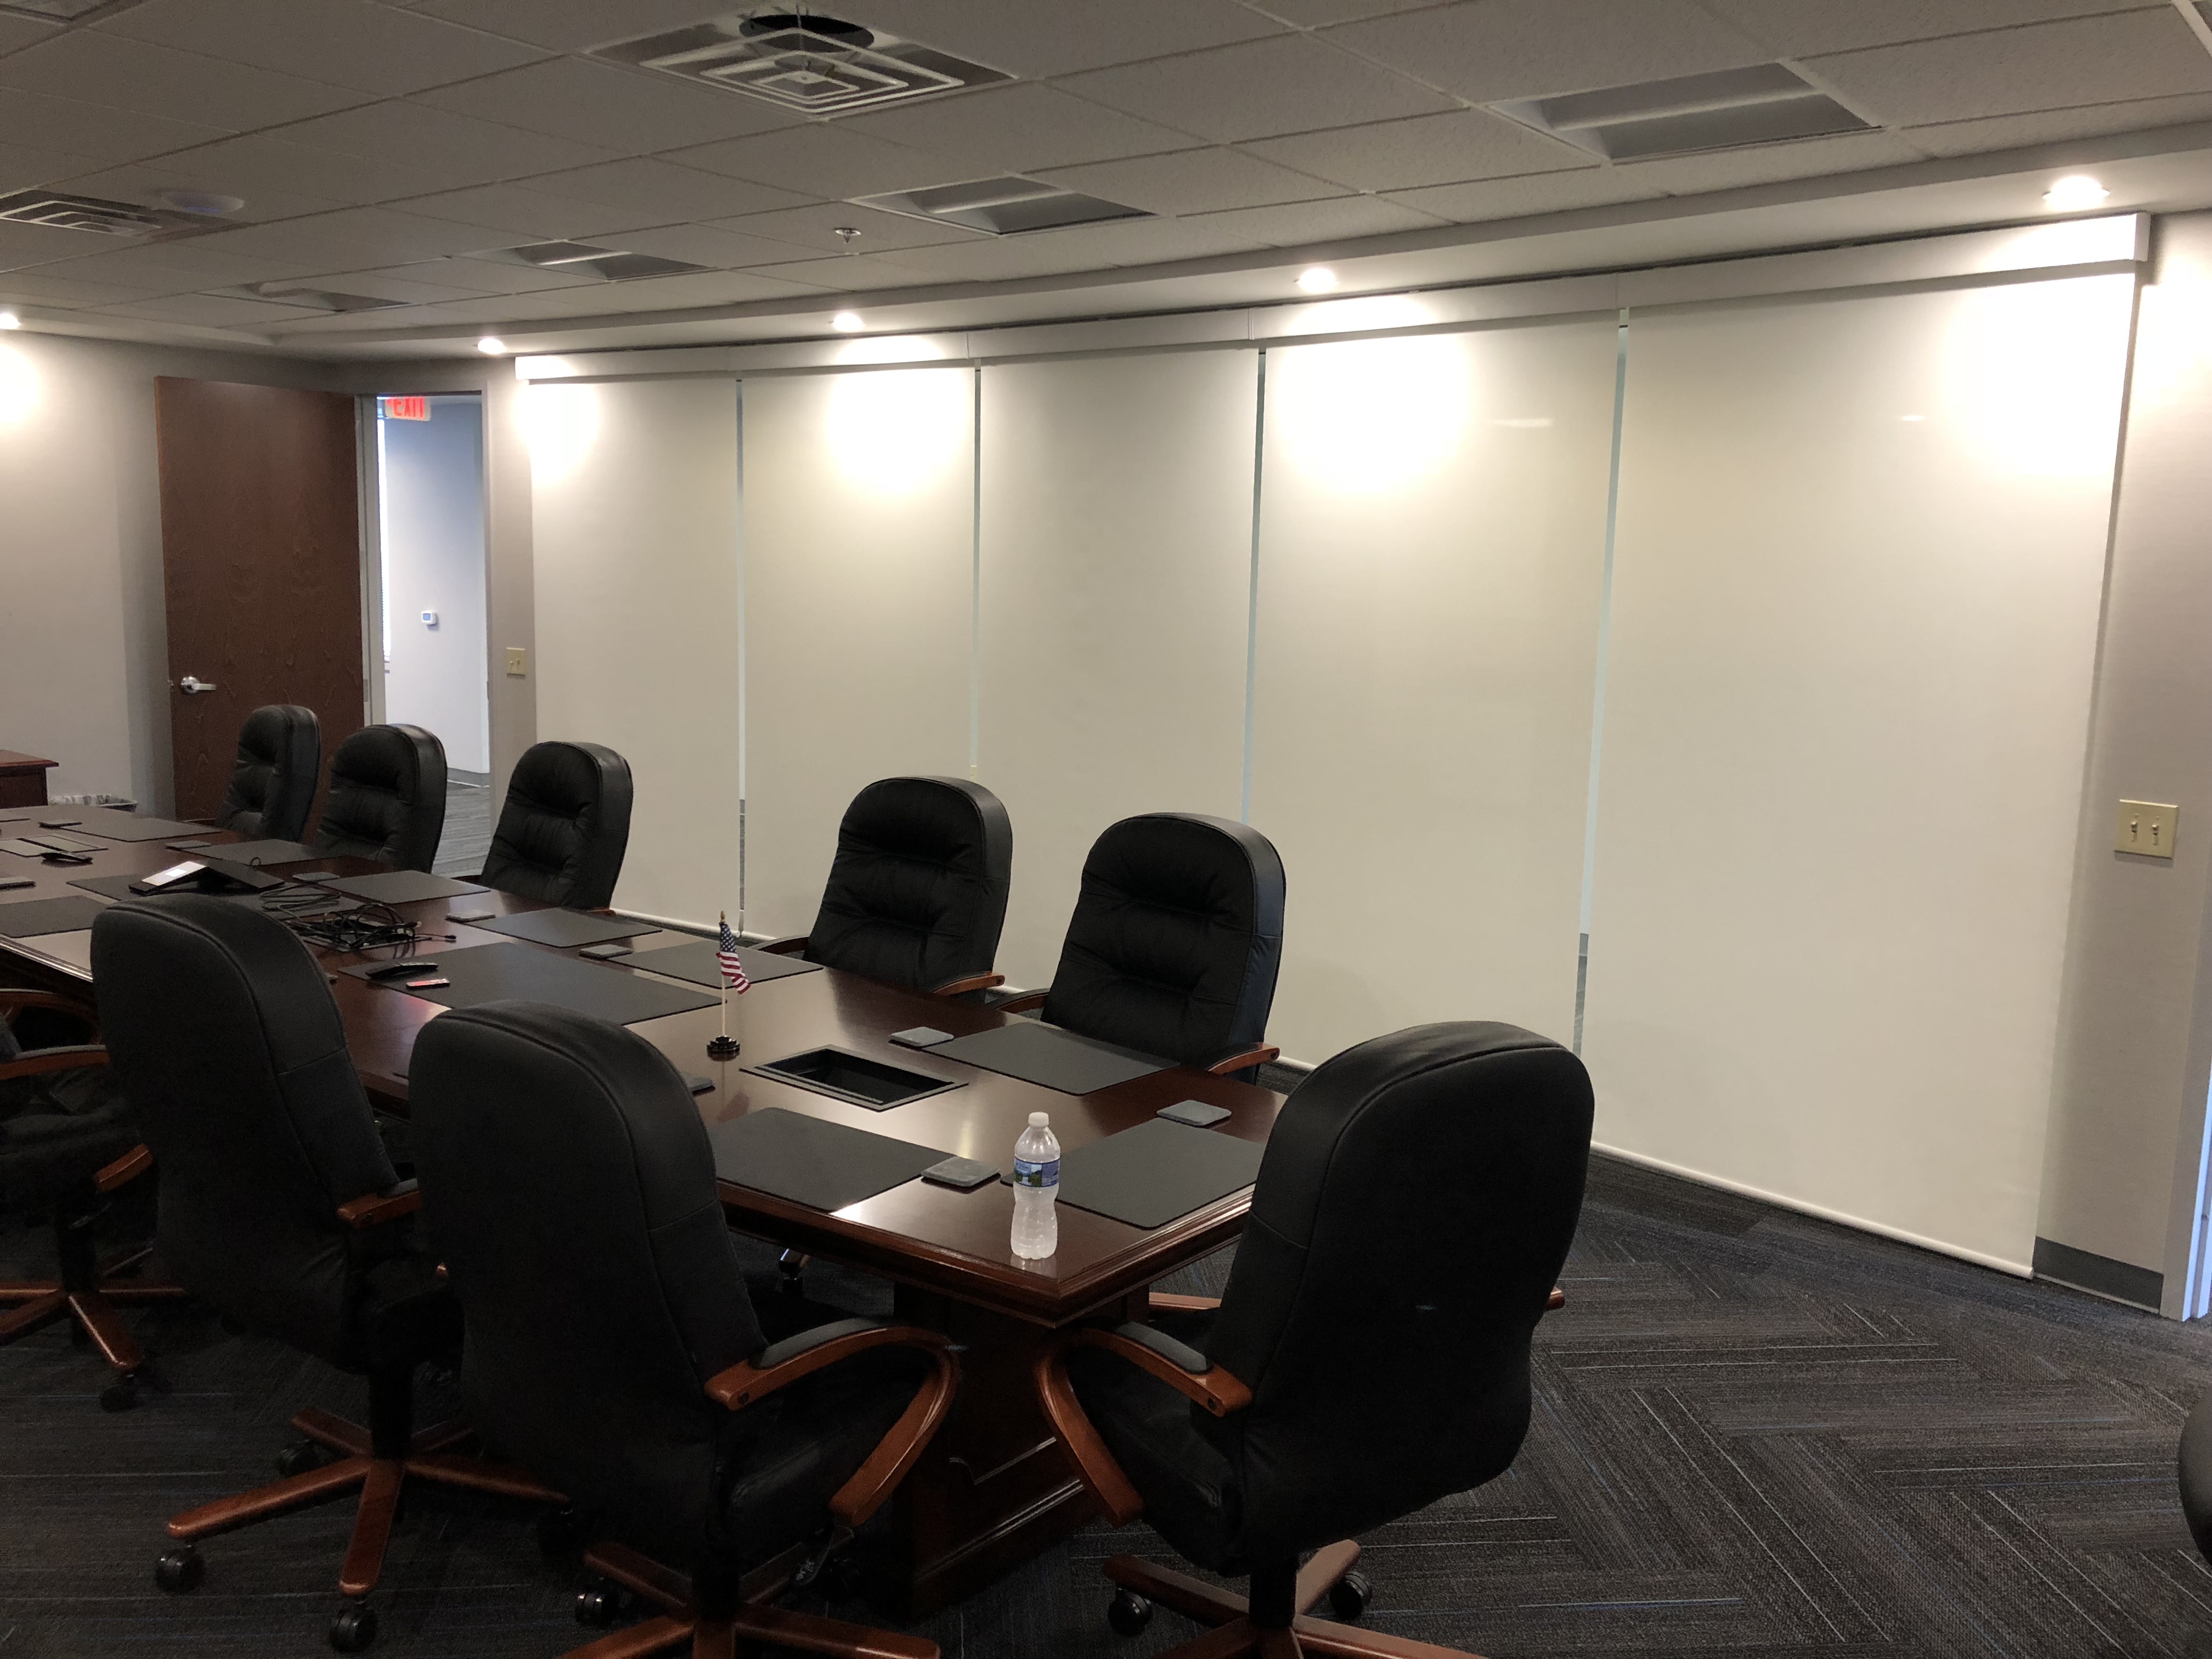 Conference room with Hunter Douglas Roller Shades